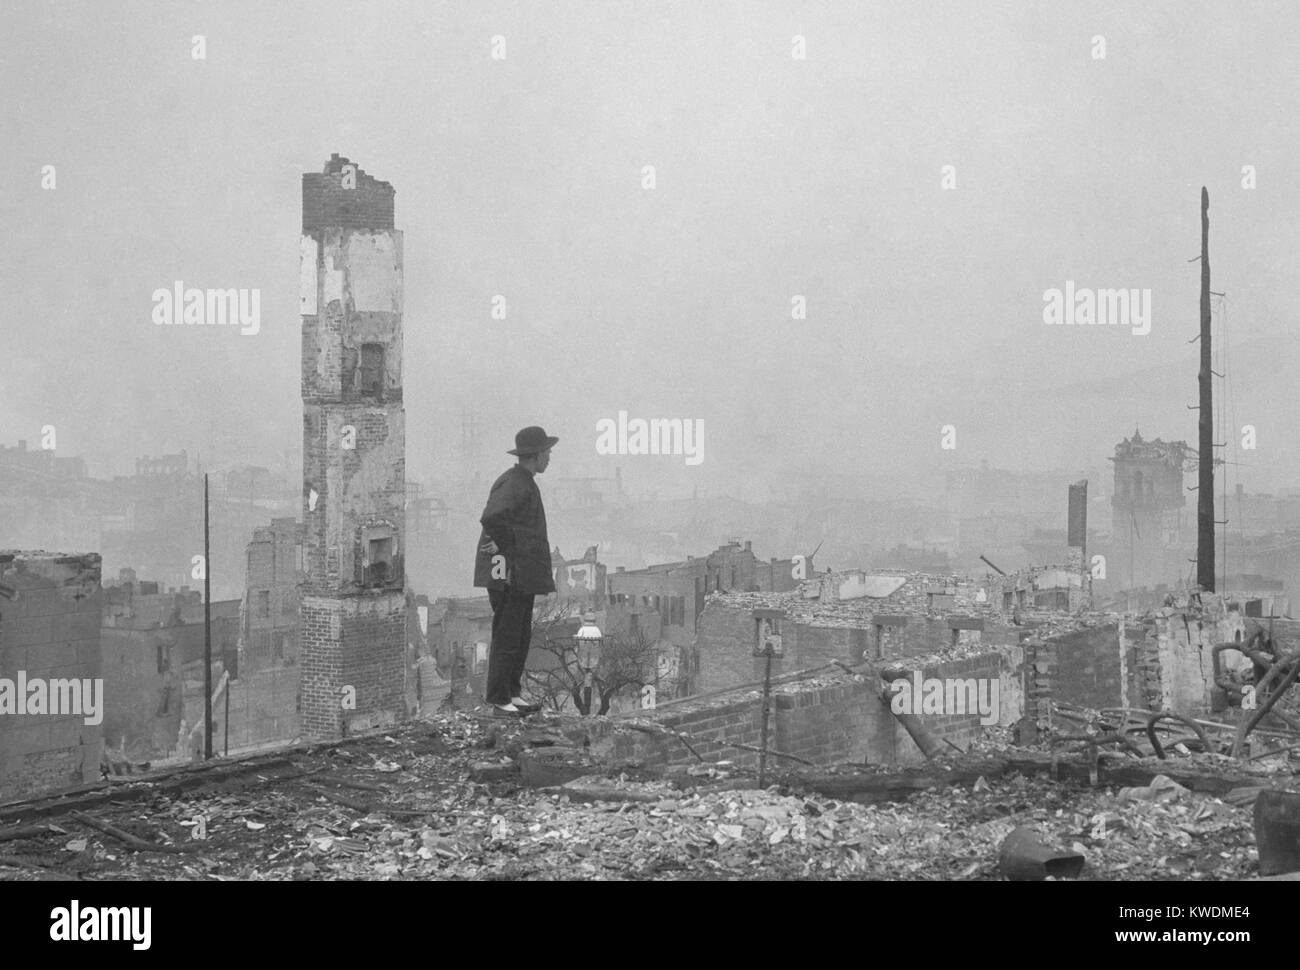 A Chinese man stands in the ruins of San Franciscos Chinatown after the April 18, 1906 earthquake. Of the 15,000 Chinese living in San Francisco’s Chinatown most Chinese left for Oakland, with only 400 remaining in the city. The post-earthquake Committee on the Location of Chinatown allowed the re-building so not to lose tax revenues and Oriental trade (BSLOC 2017 17 34) Stock Photo